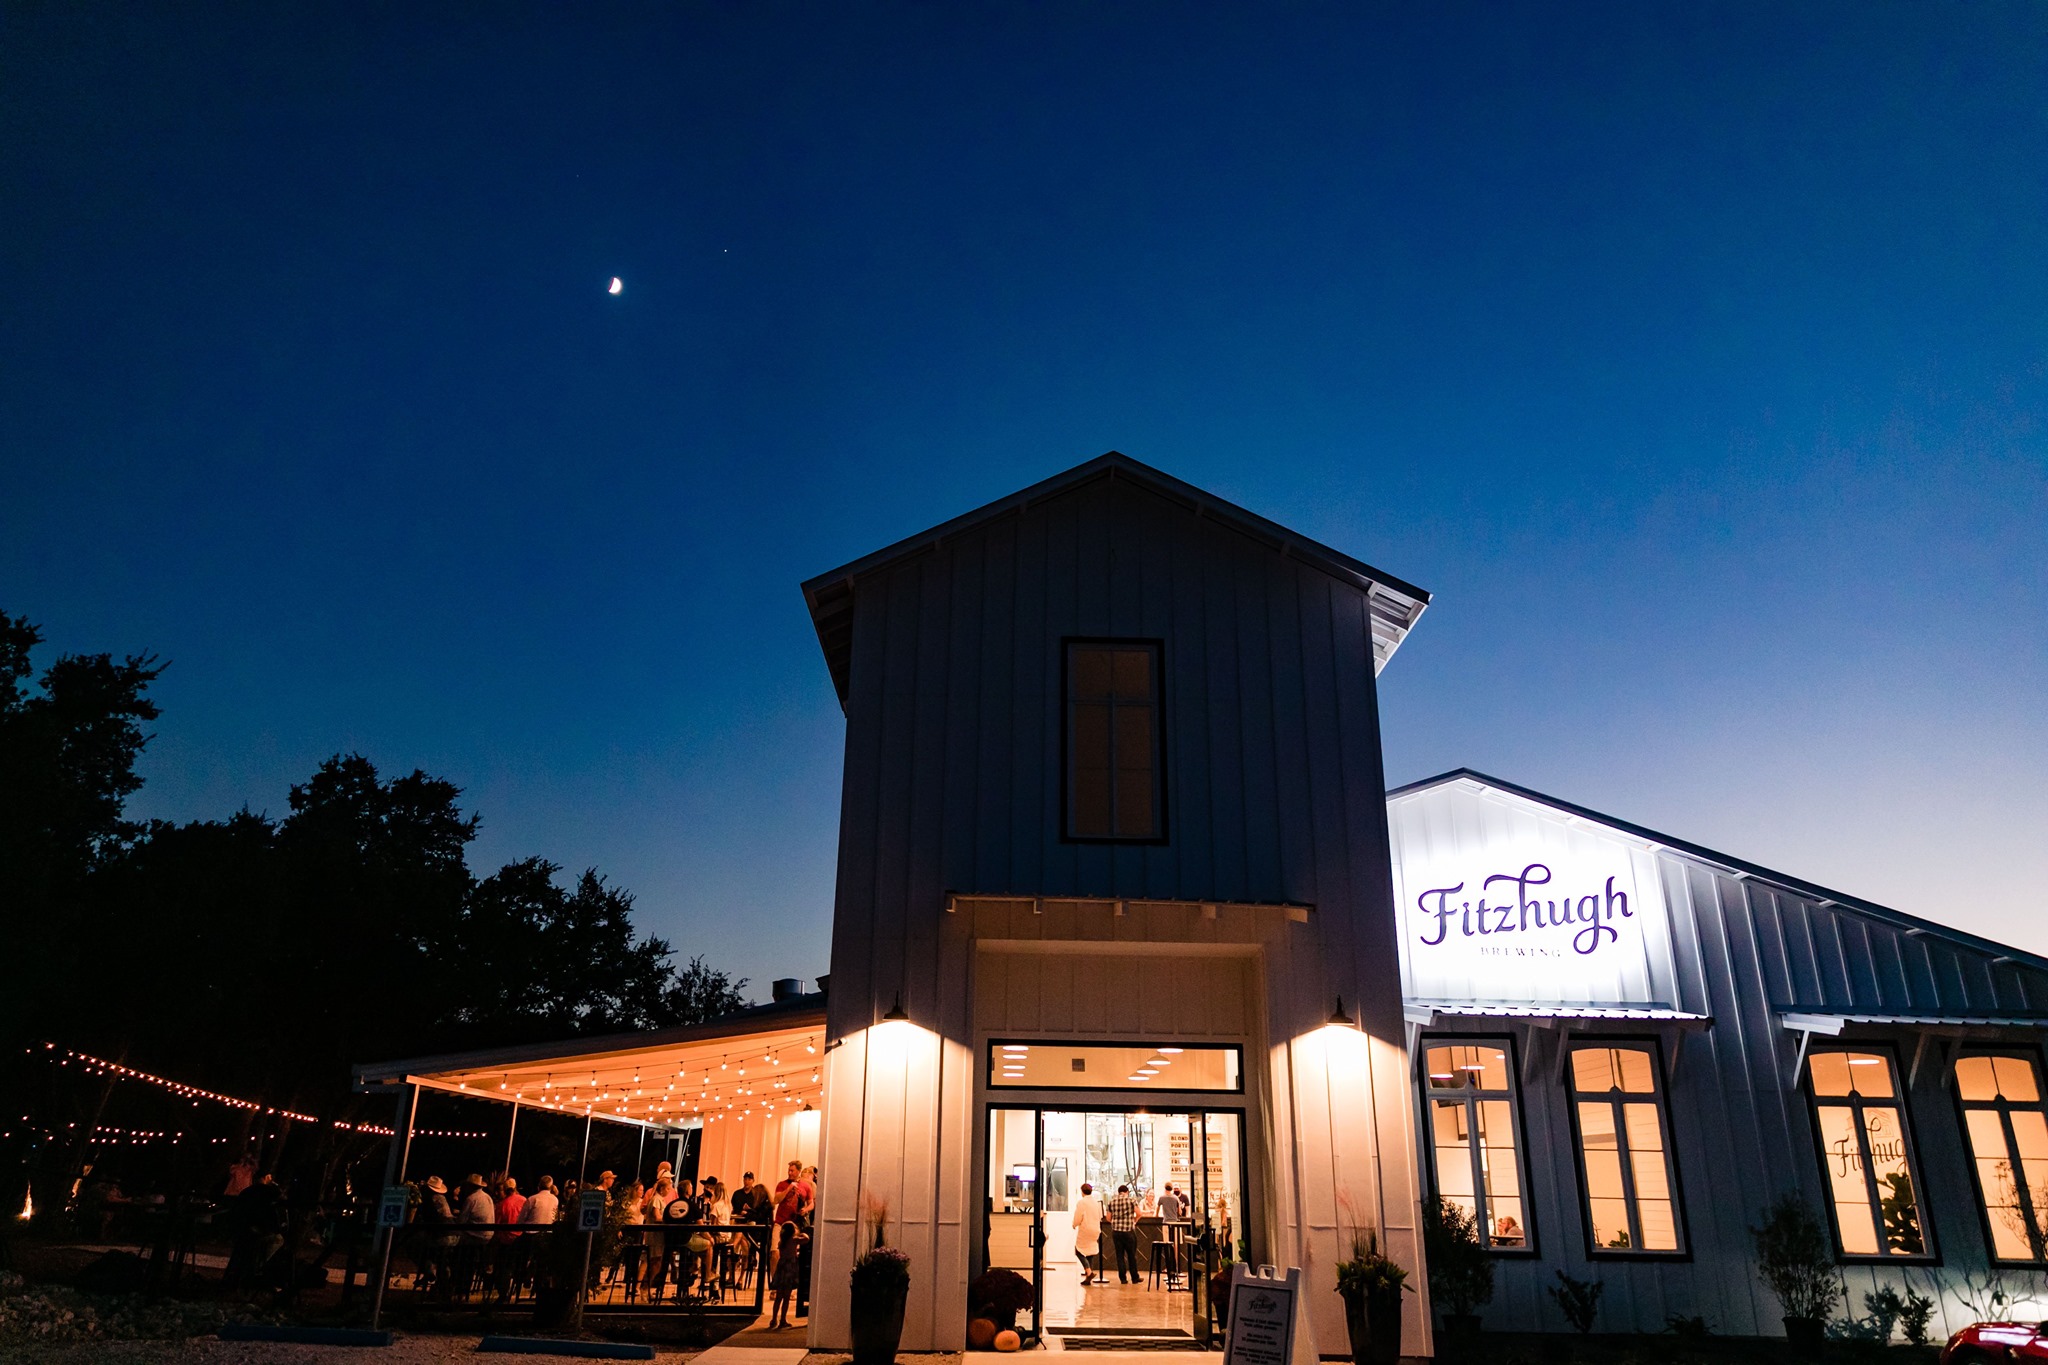 Dripping Springs breweries with playgrounds